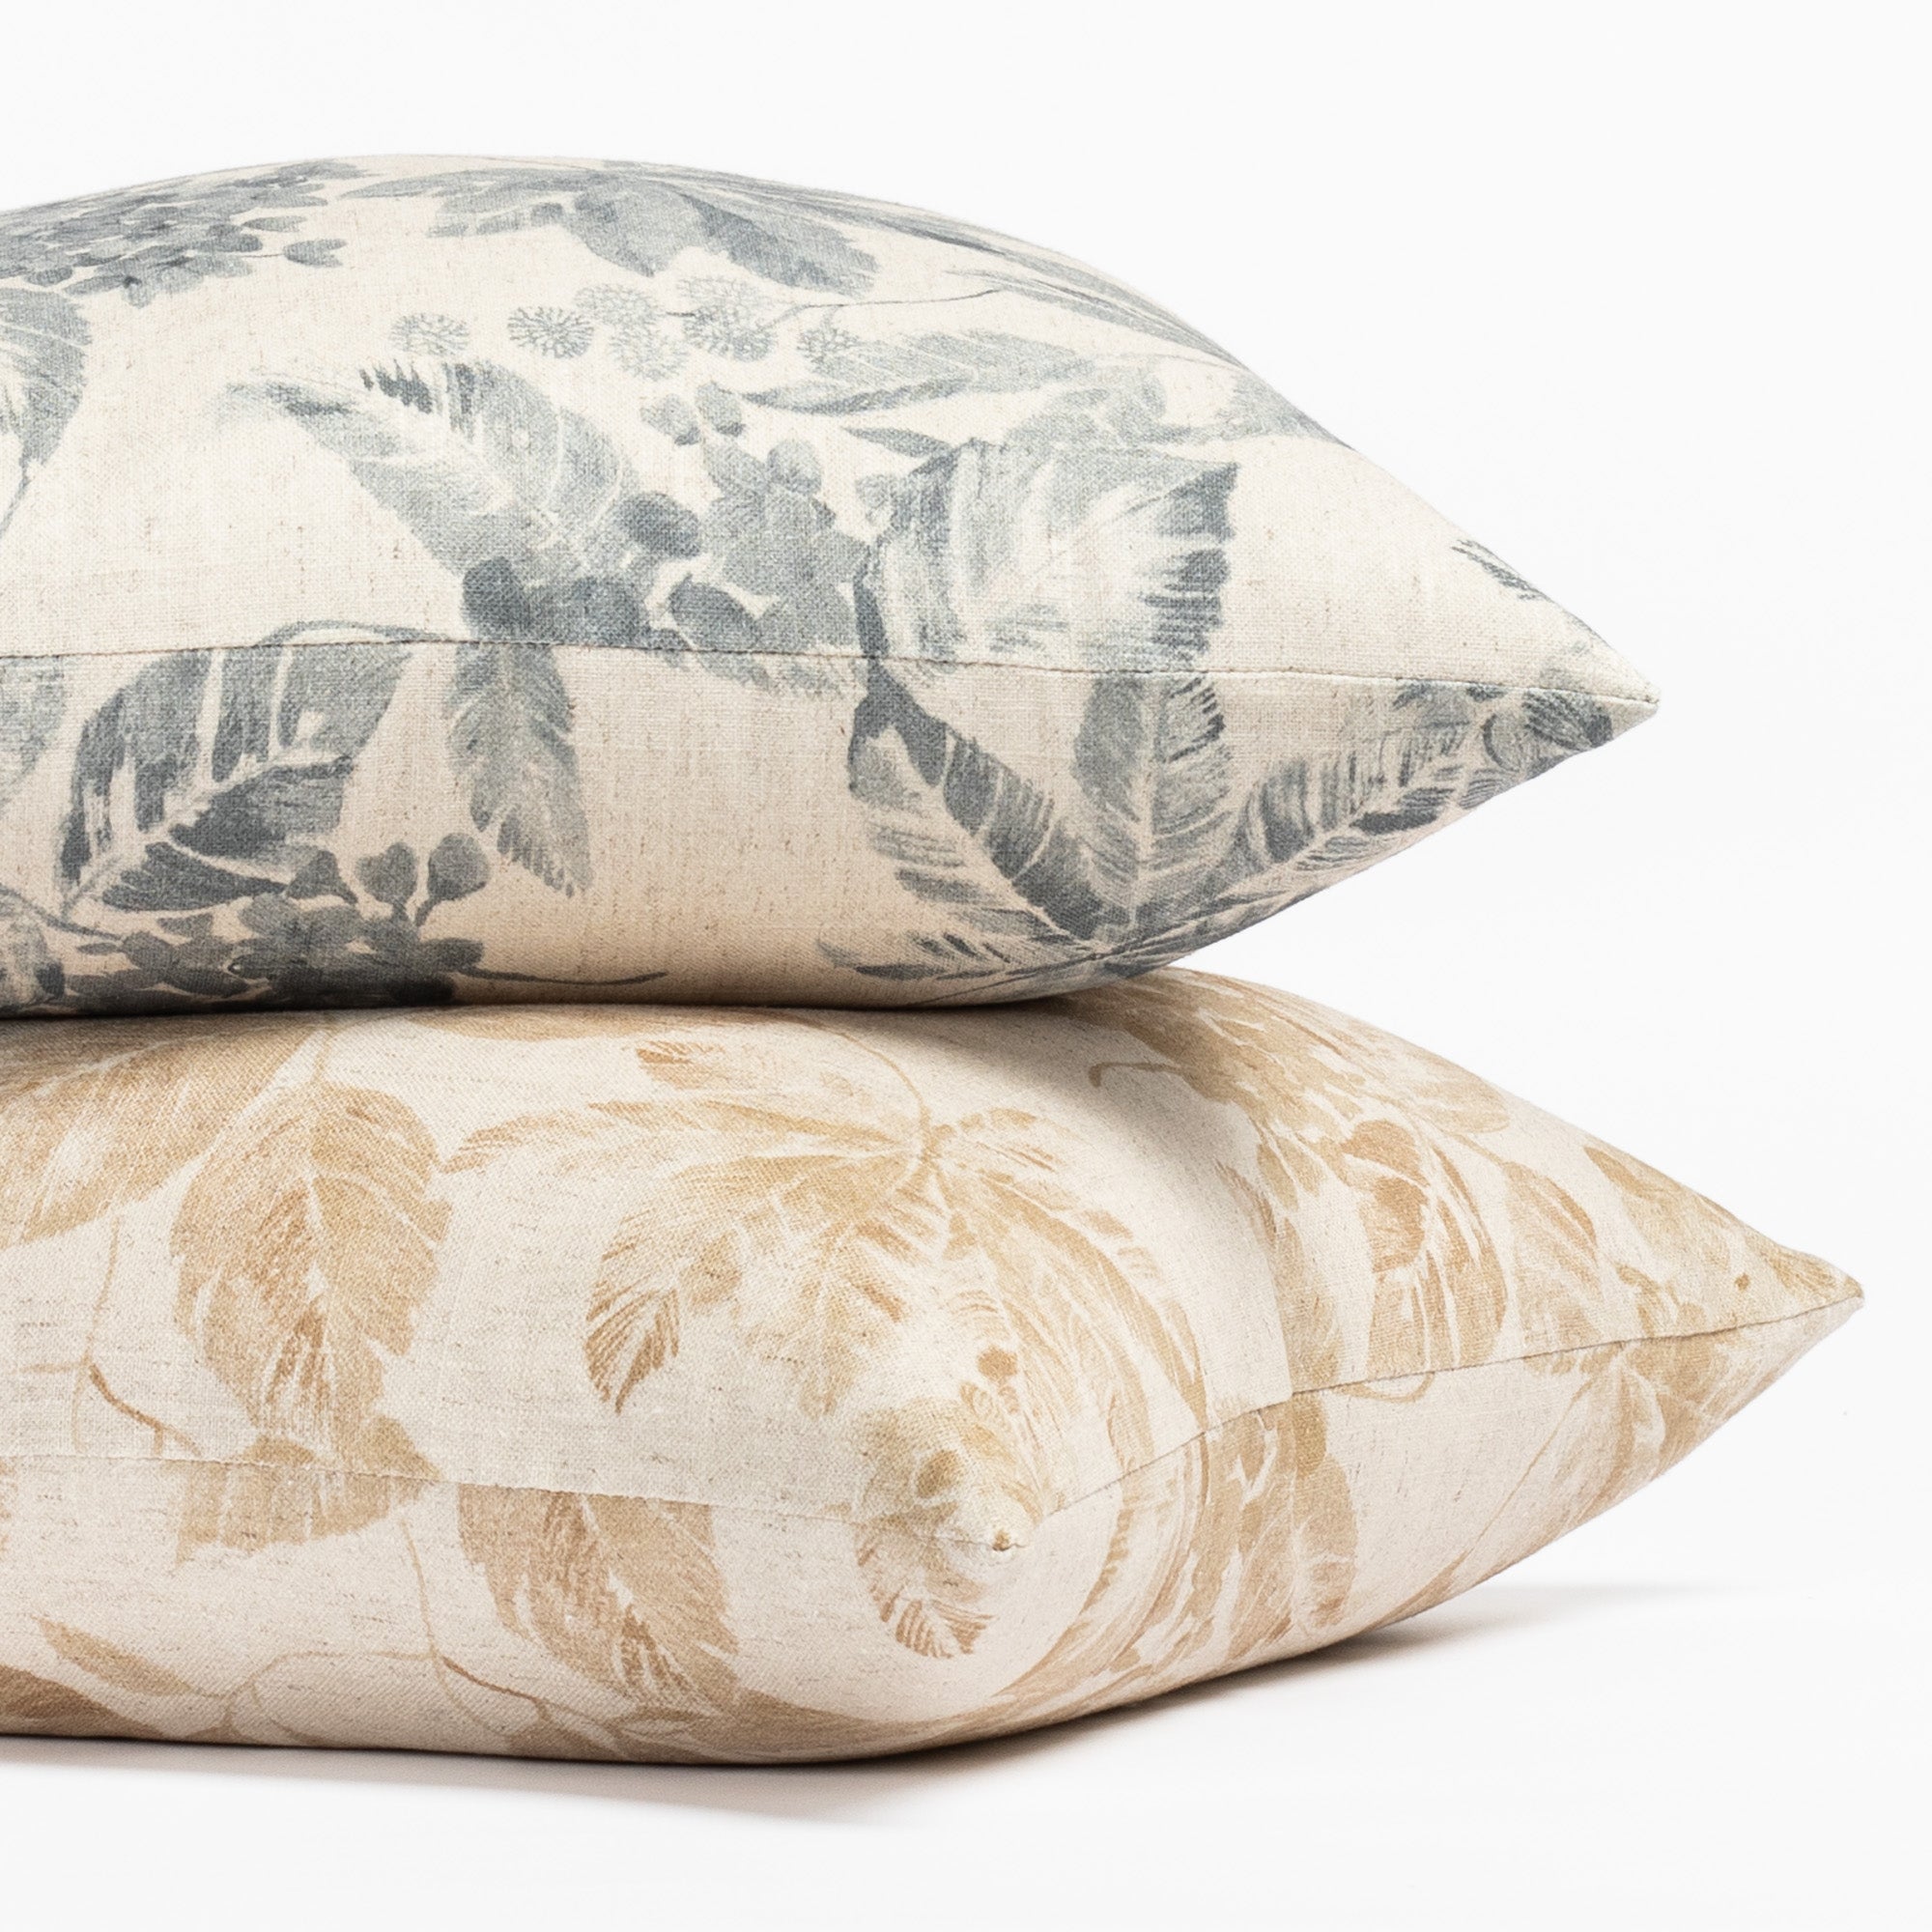 Heather throw pillows: a vintage floral print pillow in indigo blue and ochre brown colourways